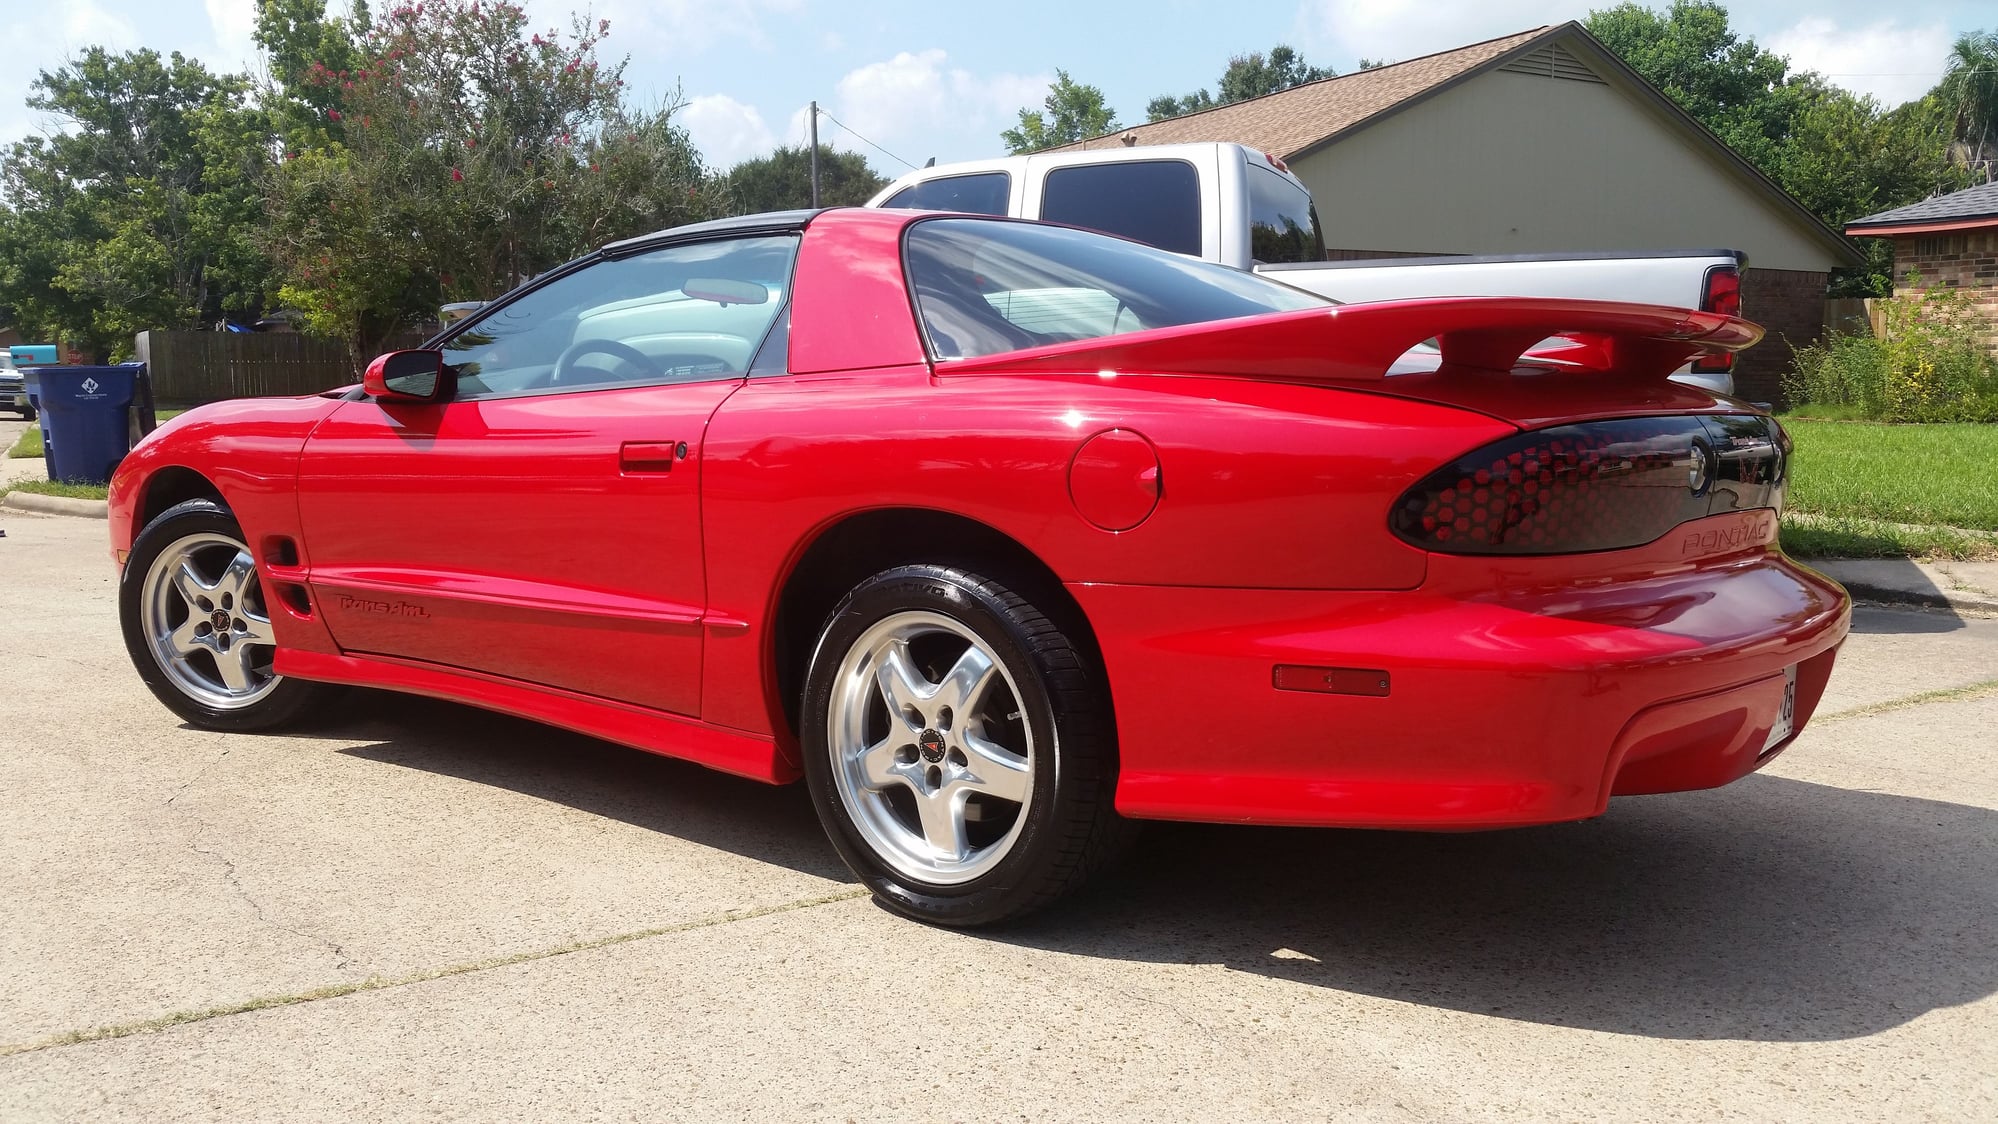 2001 Pontiac Firebird - 2001 Trans Am WS6 (SOLD) - Used - VIN 2G2FV22G112120699 - 50,000 Miles - 8 cyl - 2WD - Automatic - Coupe - Red - Angleton, TX 77515, United States